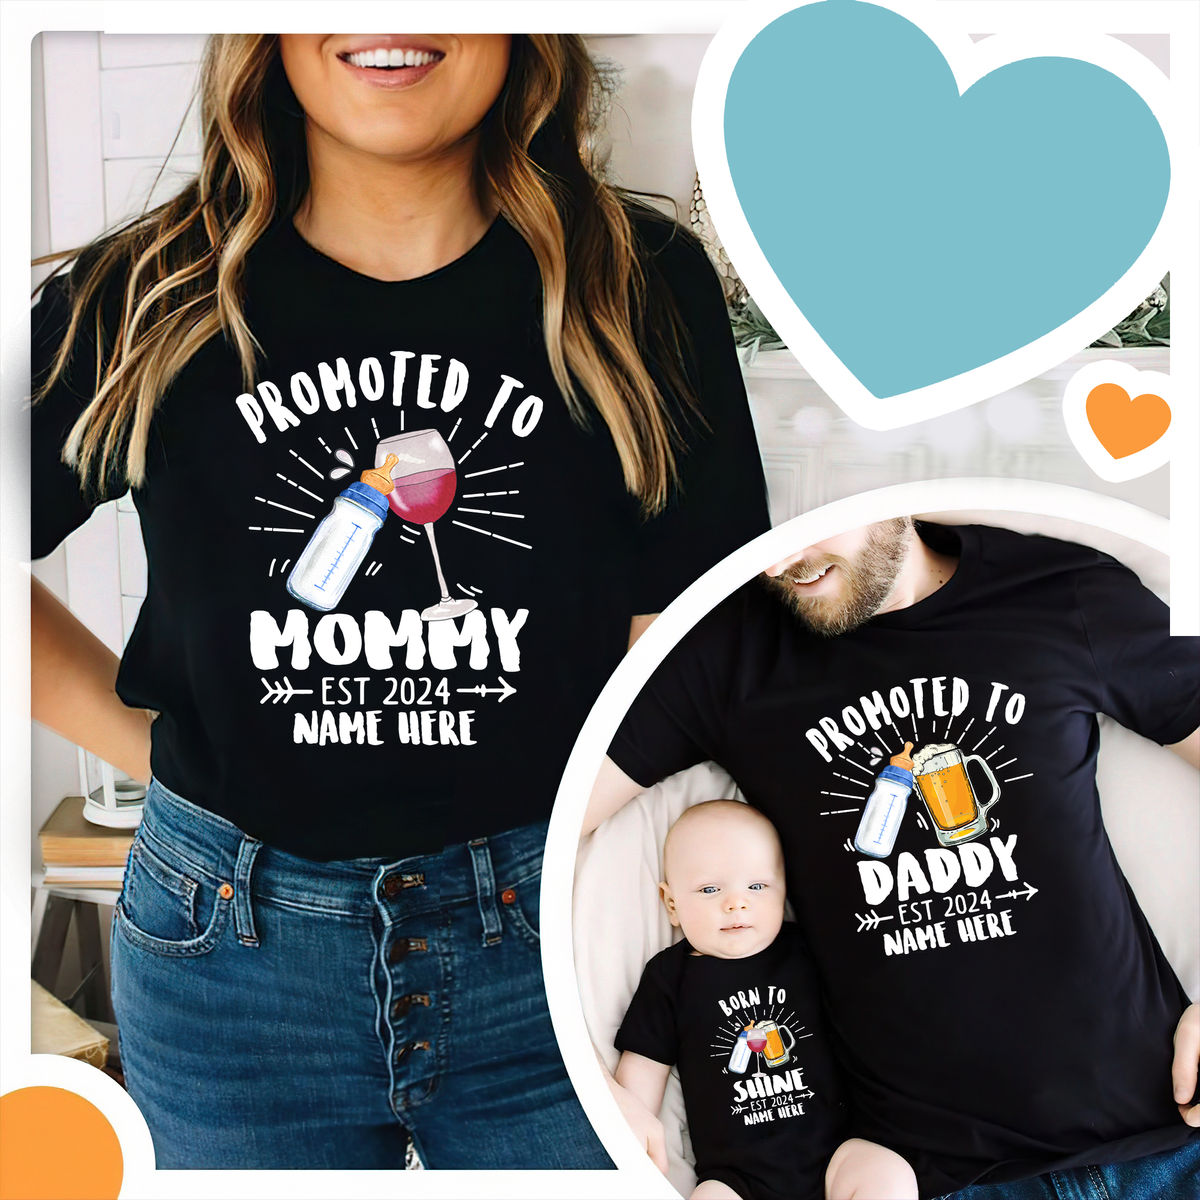 Personalized Shirt - Mother's Day Gifts - Promoted To Mommy - New Mom Gifts - Gifts For Mom - Mother's Day Shirts_2